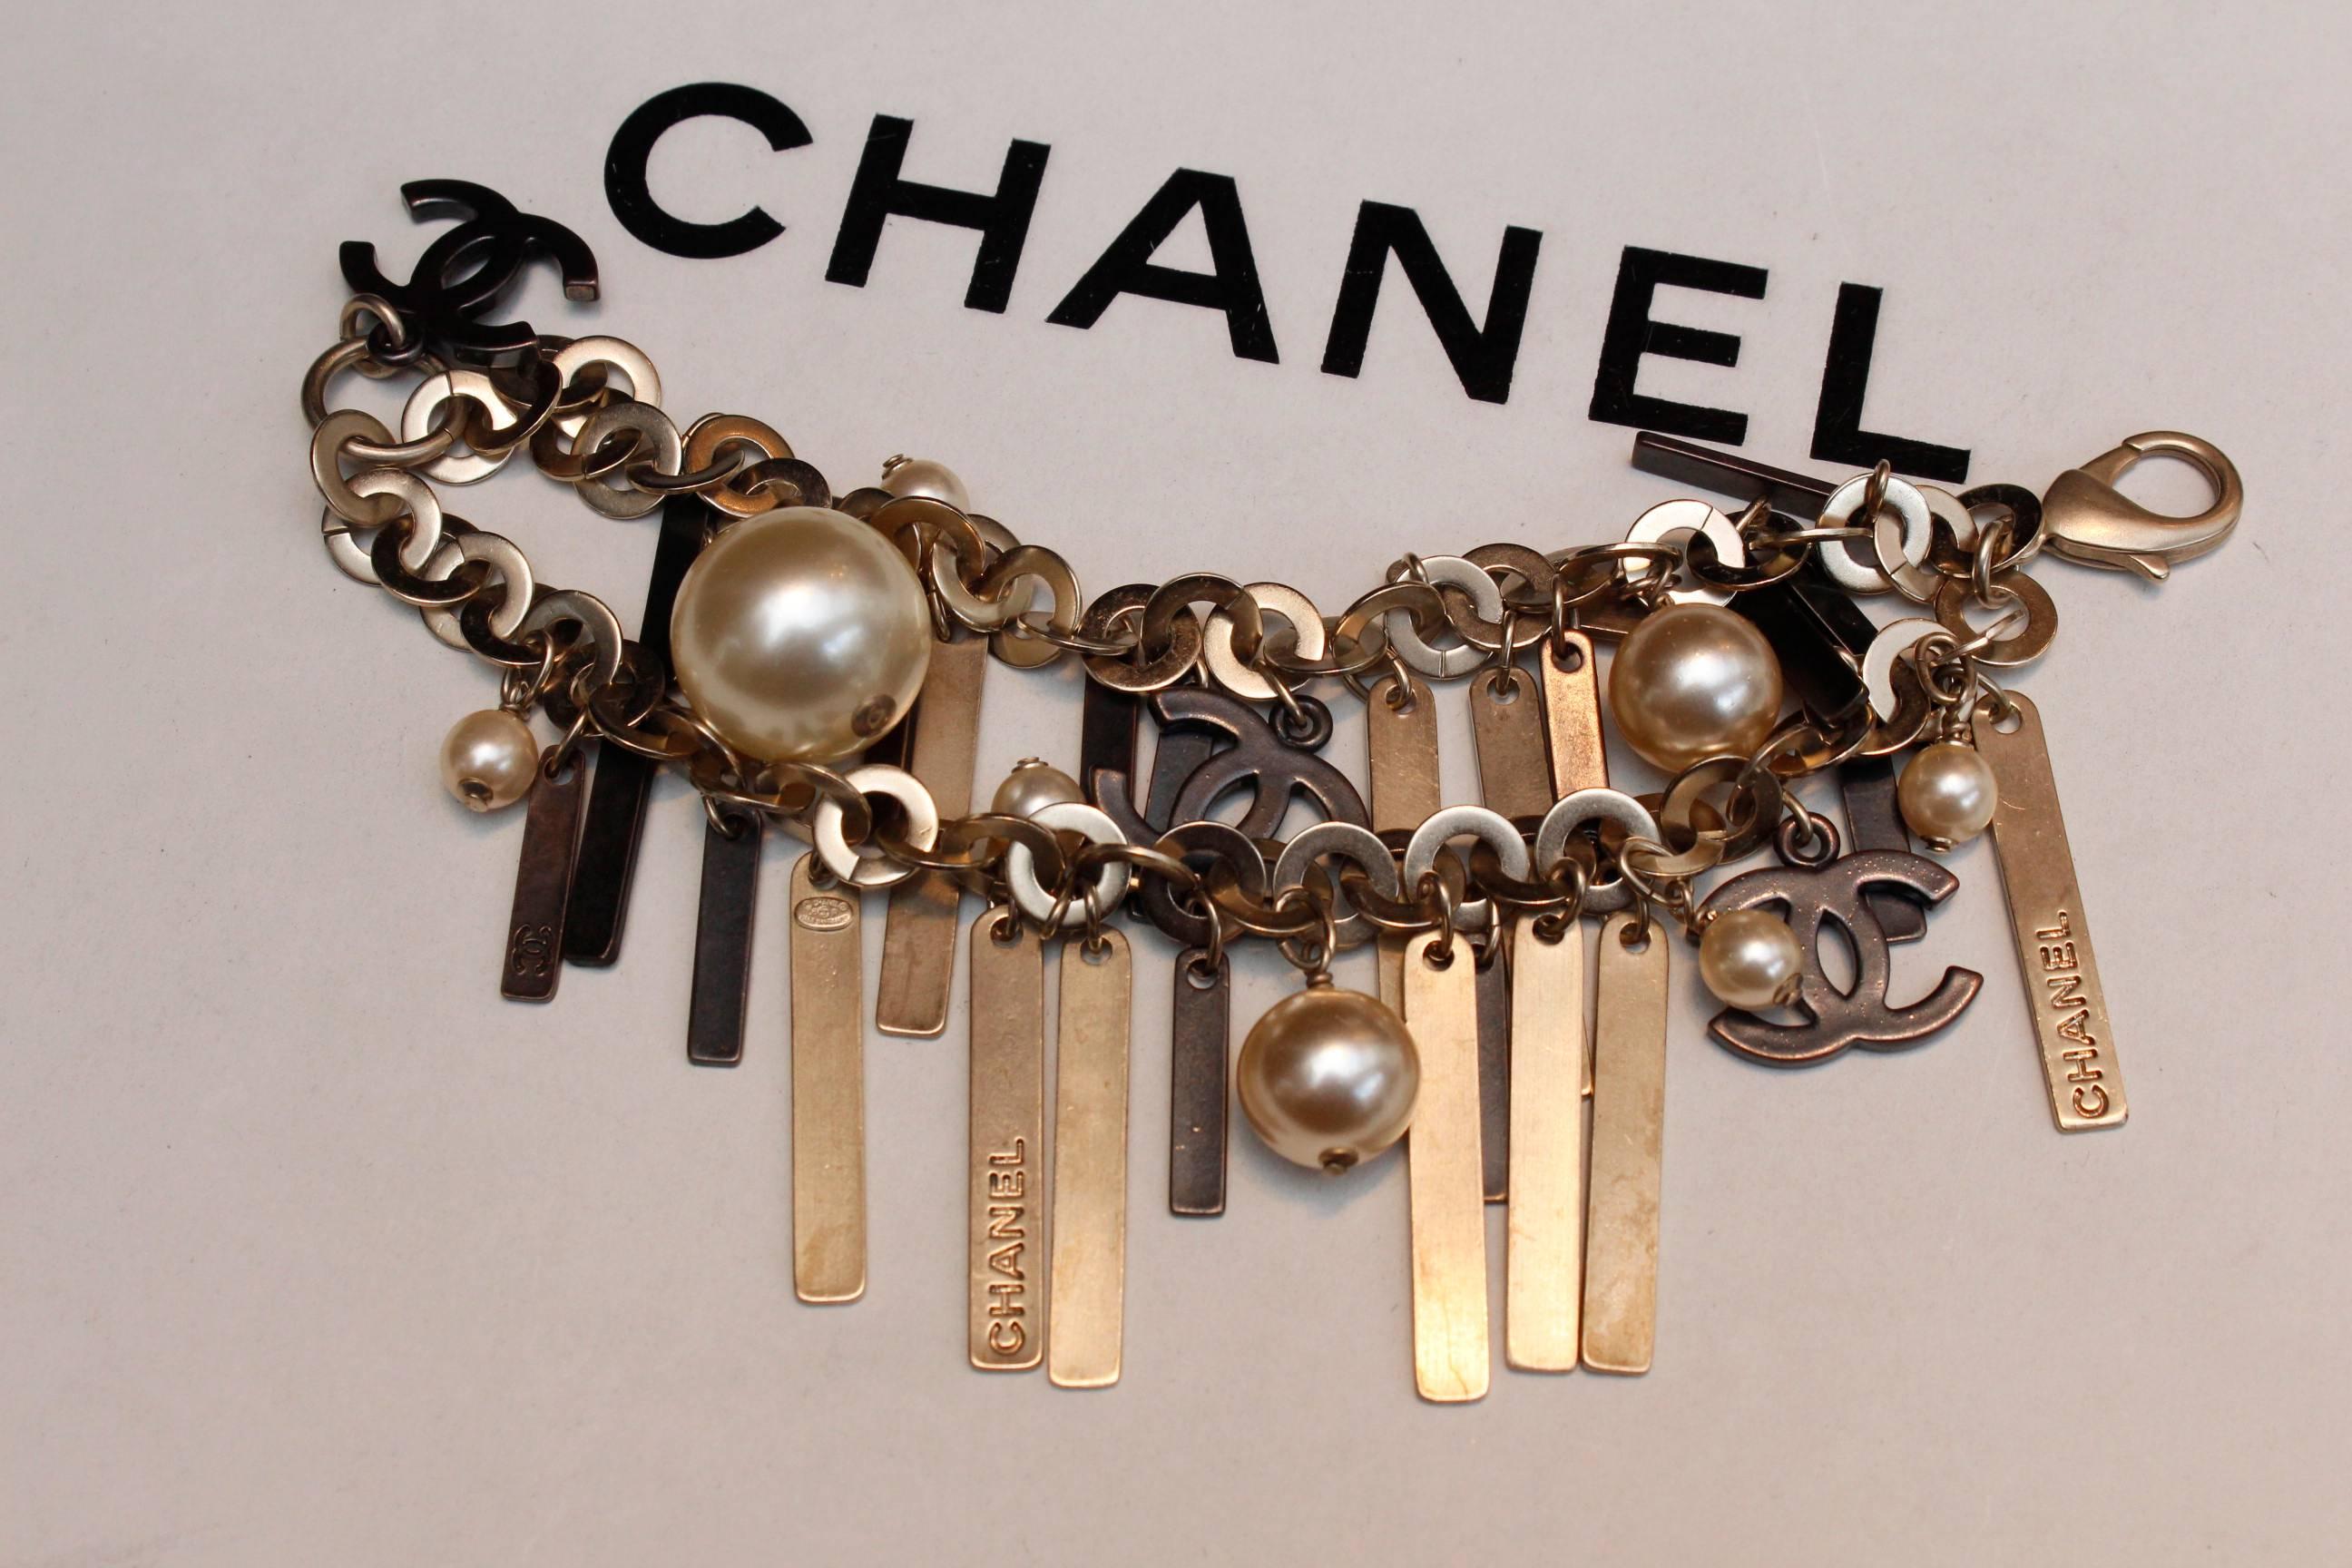 CHANEL (Made in France) Bracelet composed of two strands of silver/gold rings decorated with multiple blackened silver plate and gold thin strips, and with pearly beads and a few blackened CC logos.

2003 Spring Collection, as indicated on the